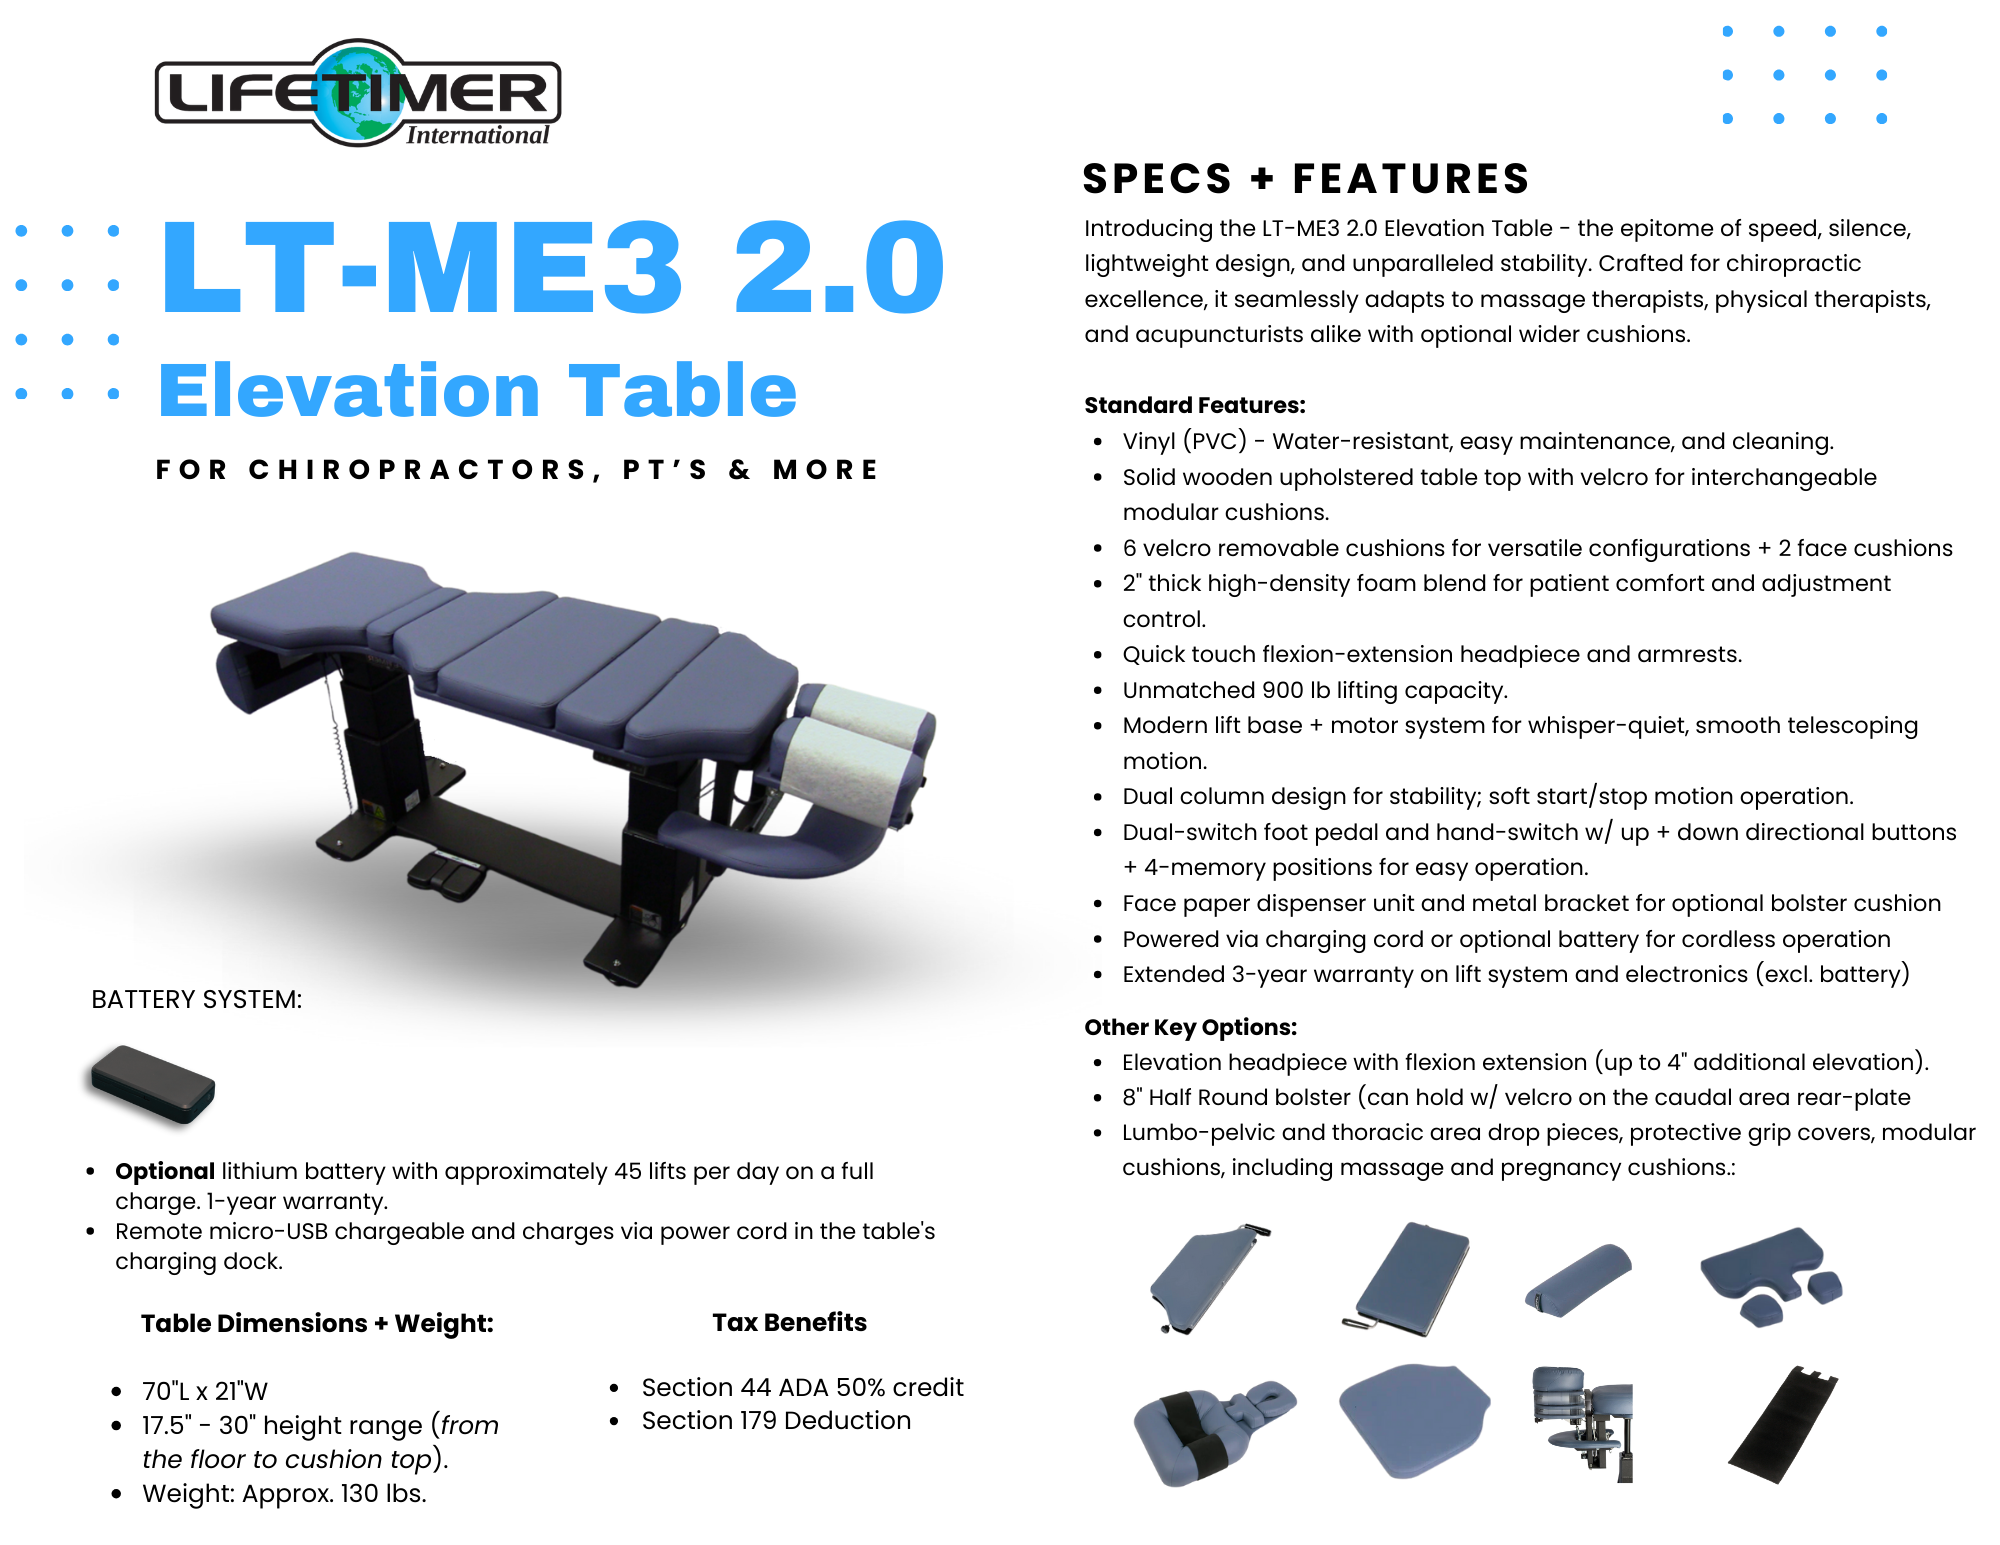 Spec Sheet for LT-ME3 2.0 Chiropractic Elevation Drop Table From Lifetimer International